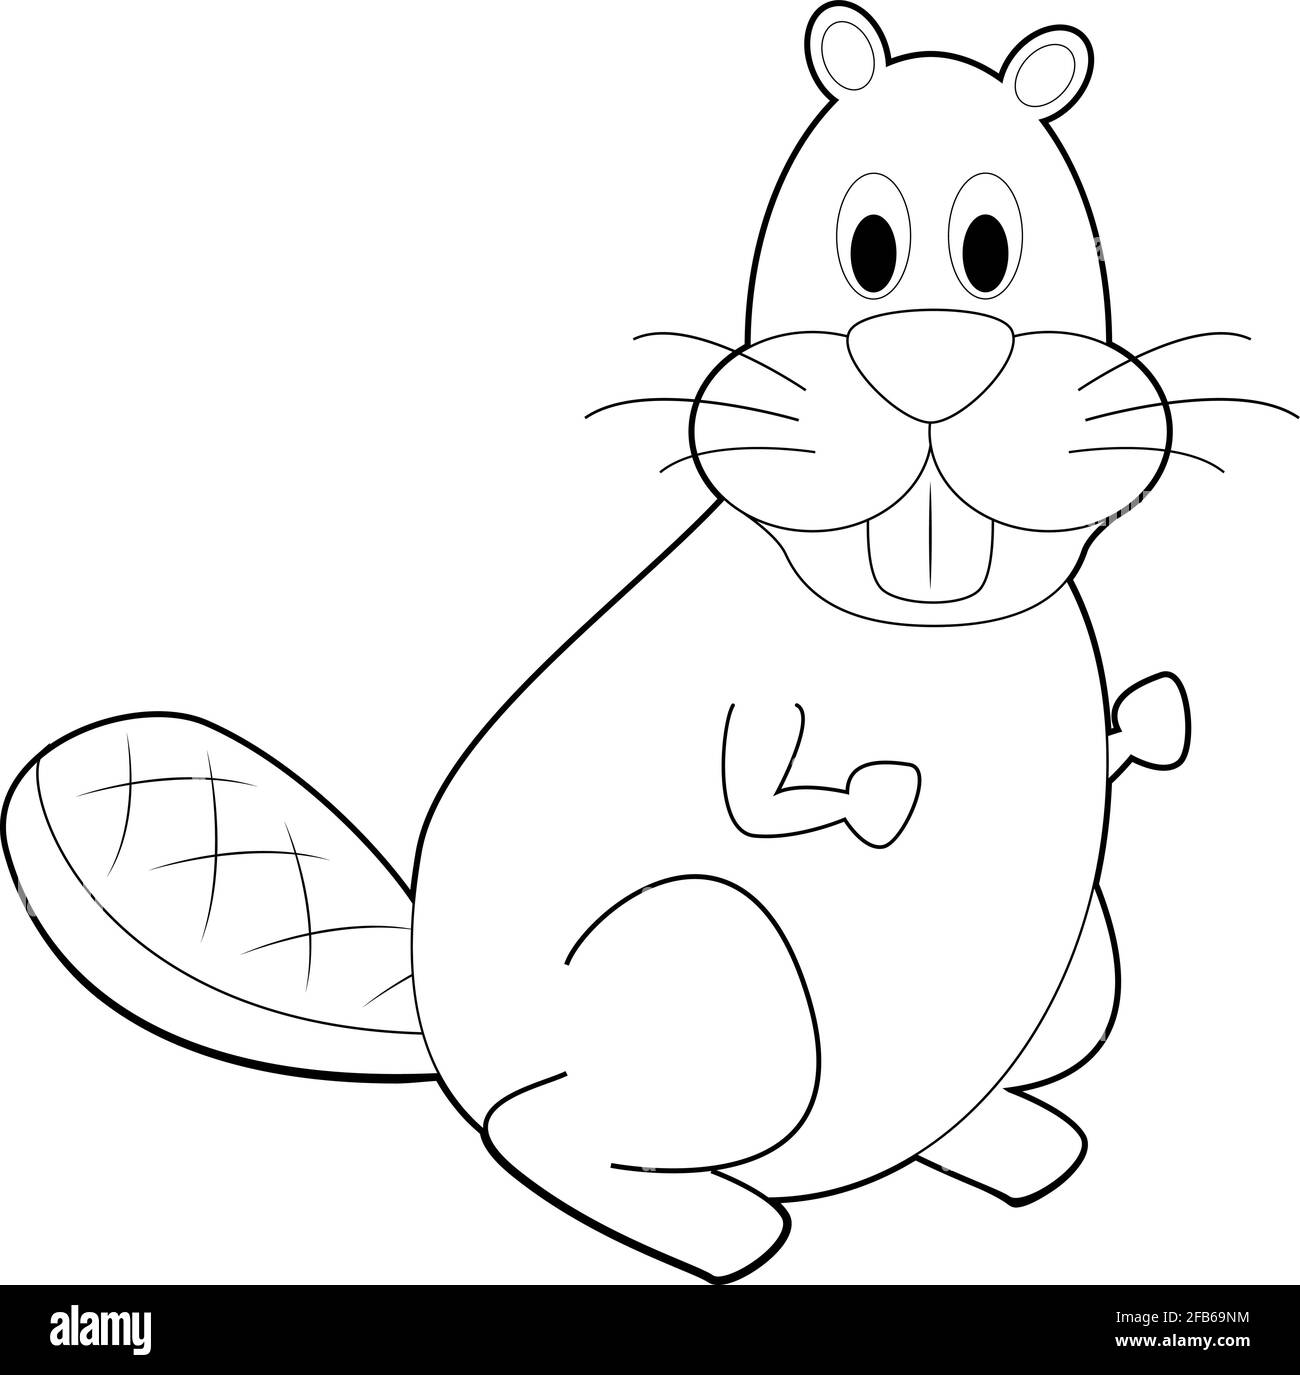 Easy Coloring drawings of animals for little kids: Beaver Stock Vector